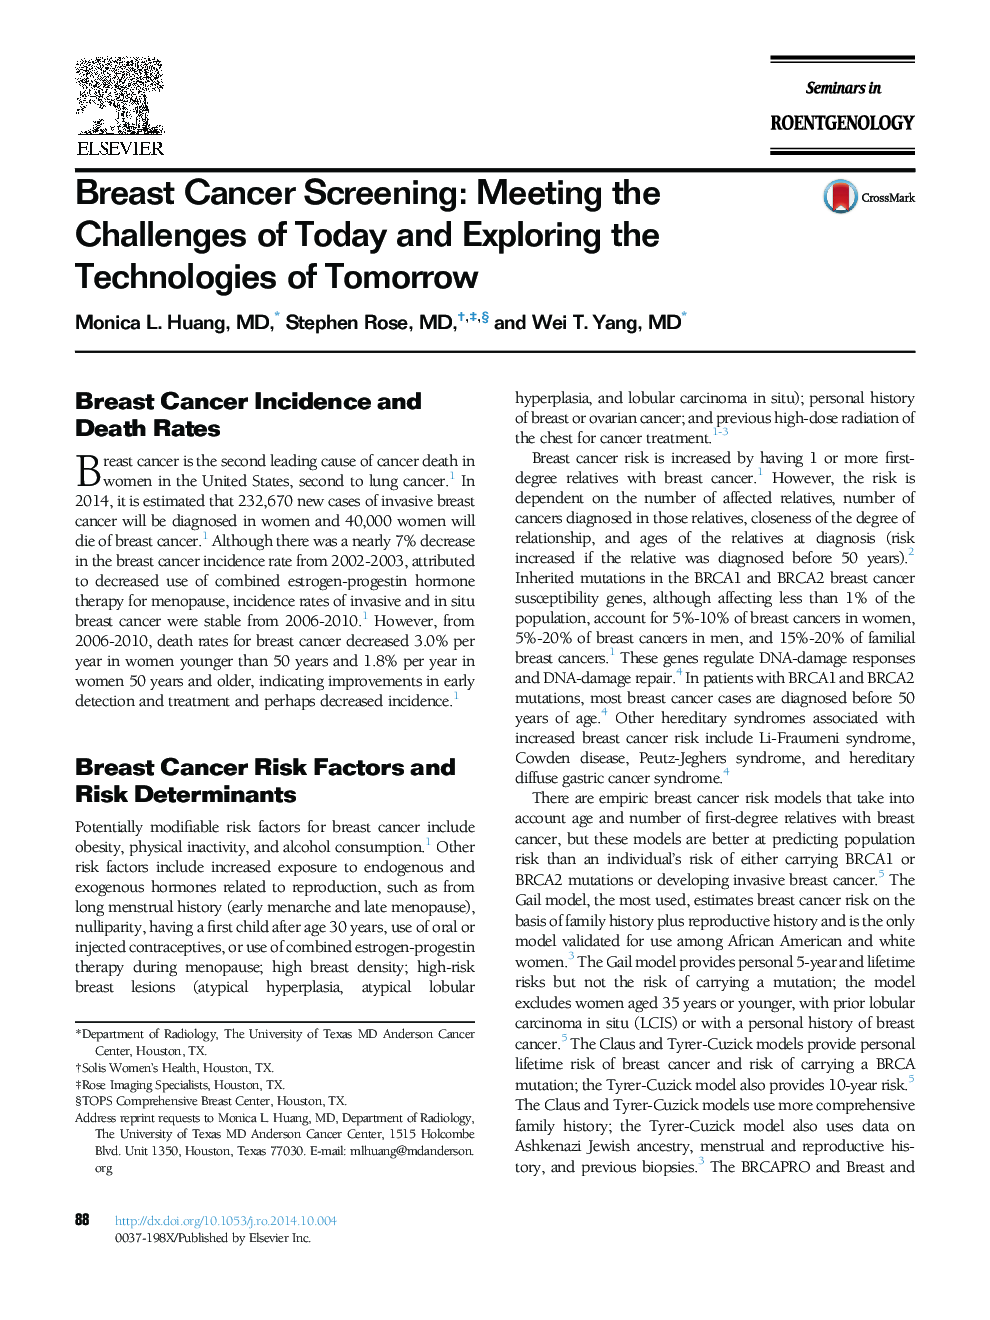 Breast Cancer Screening: Meeting the Challenges of Today and Exploring the Technologies of Tomorrow